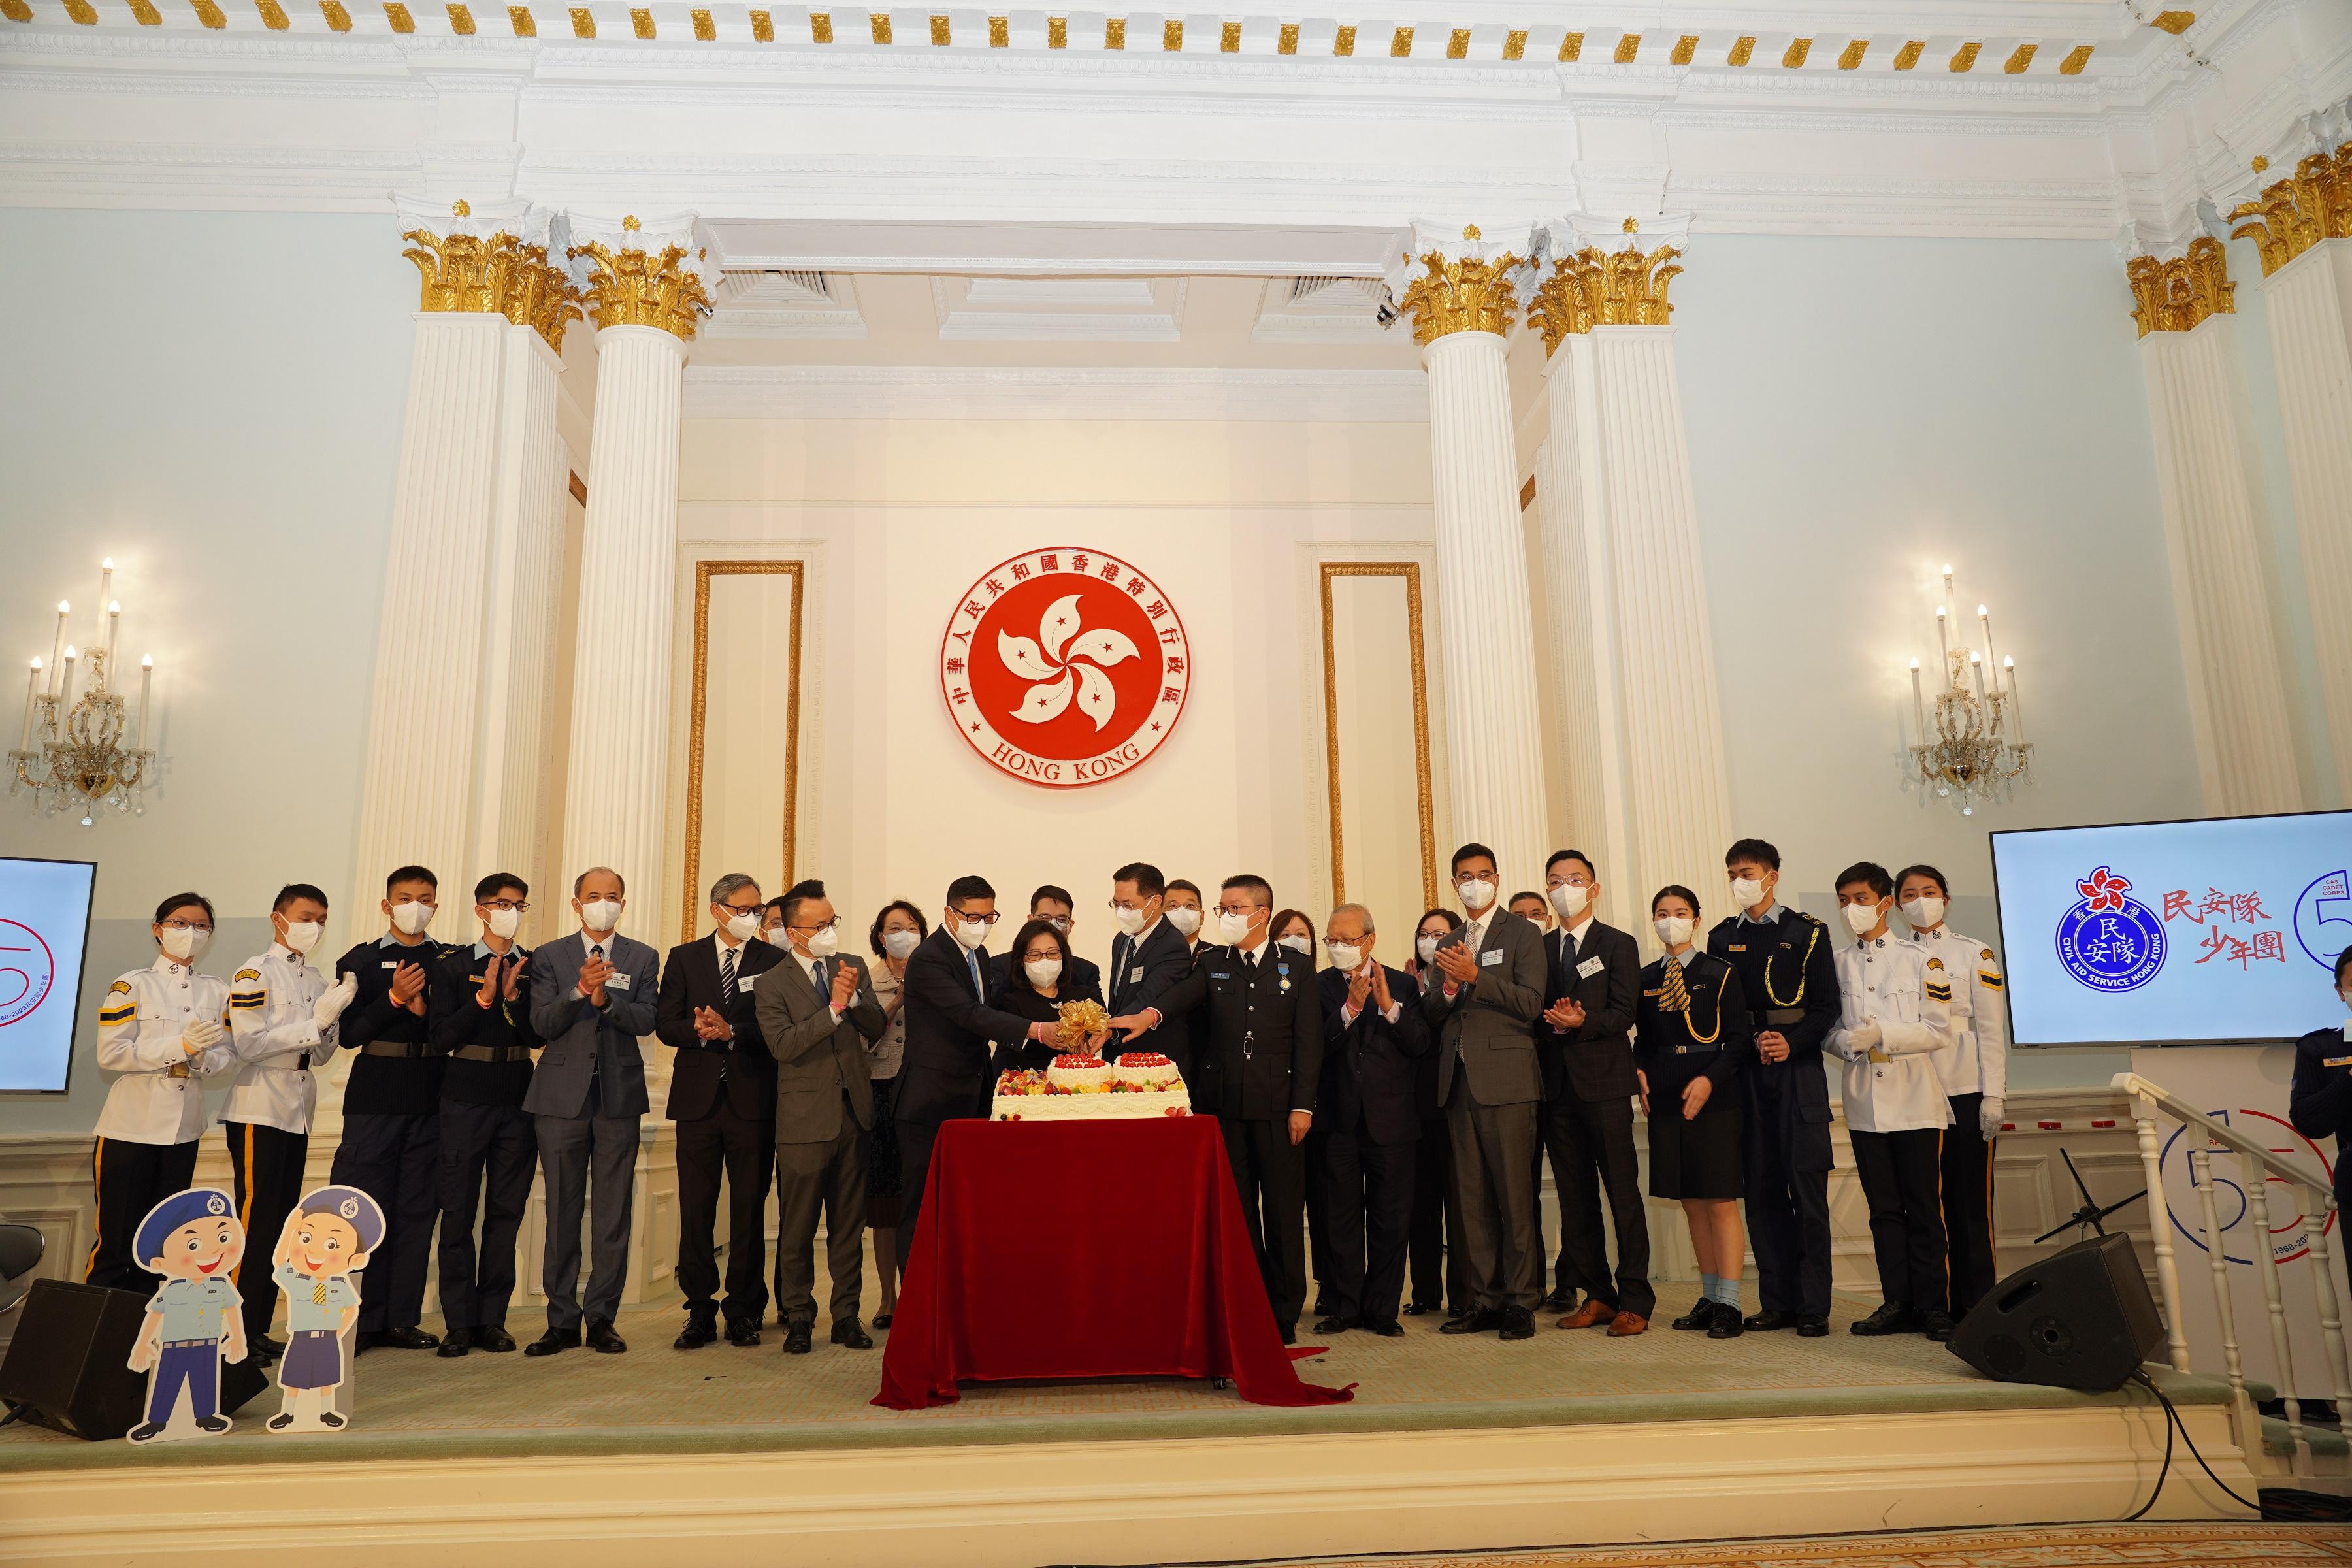 The Civil Aid Service held the Cadet Corps 55th Anniversary Celebration Events Kick-off Ceremony at the Government House today (January 7). Photo shows the wife of the Chief Executive, Mrs Janet Lee (front row, ninth left); the Secretary for Security, Mr Tang Ping-Keung (front row, eighth left); the Permanent Secretary for Security, Mr Li Pak-chuen (front row, seventh left) and other guests officiating at the cake-cutting ceremony.